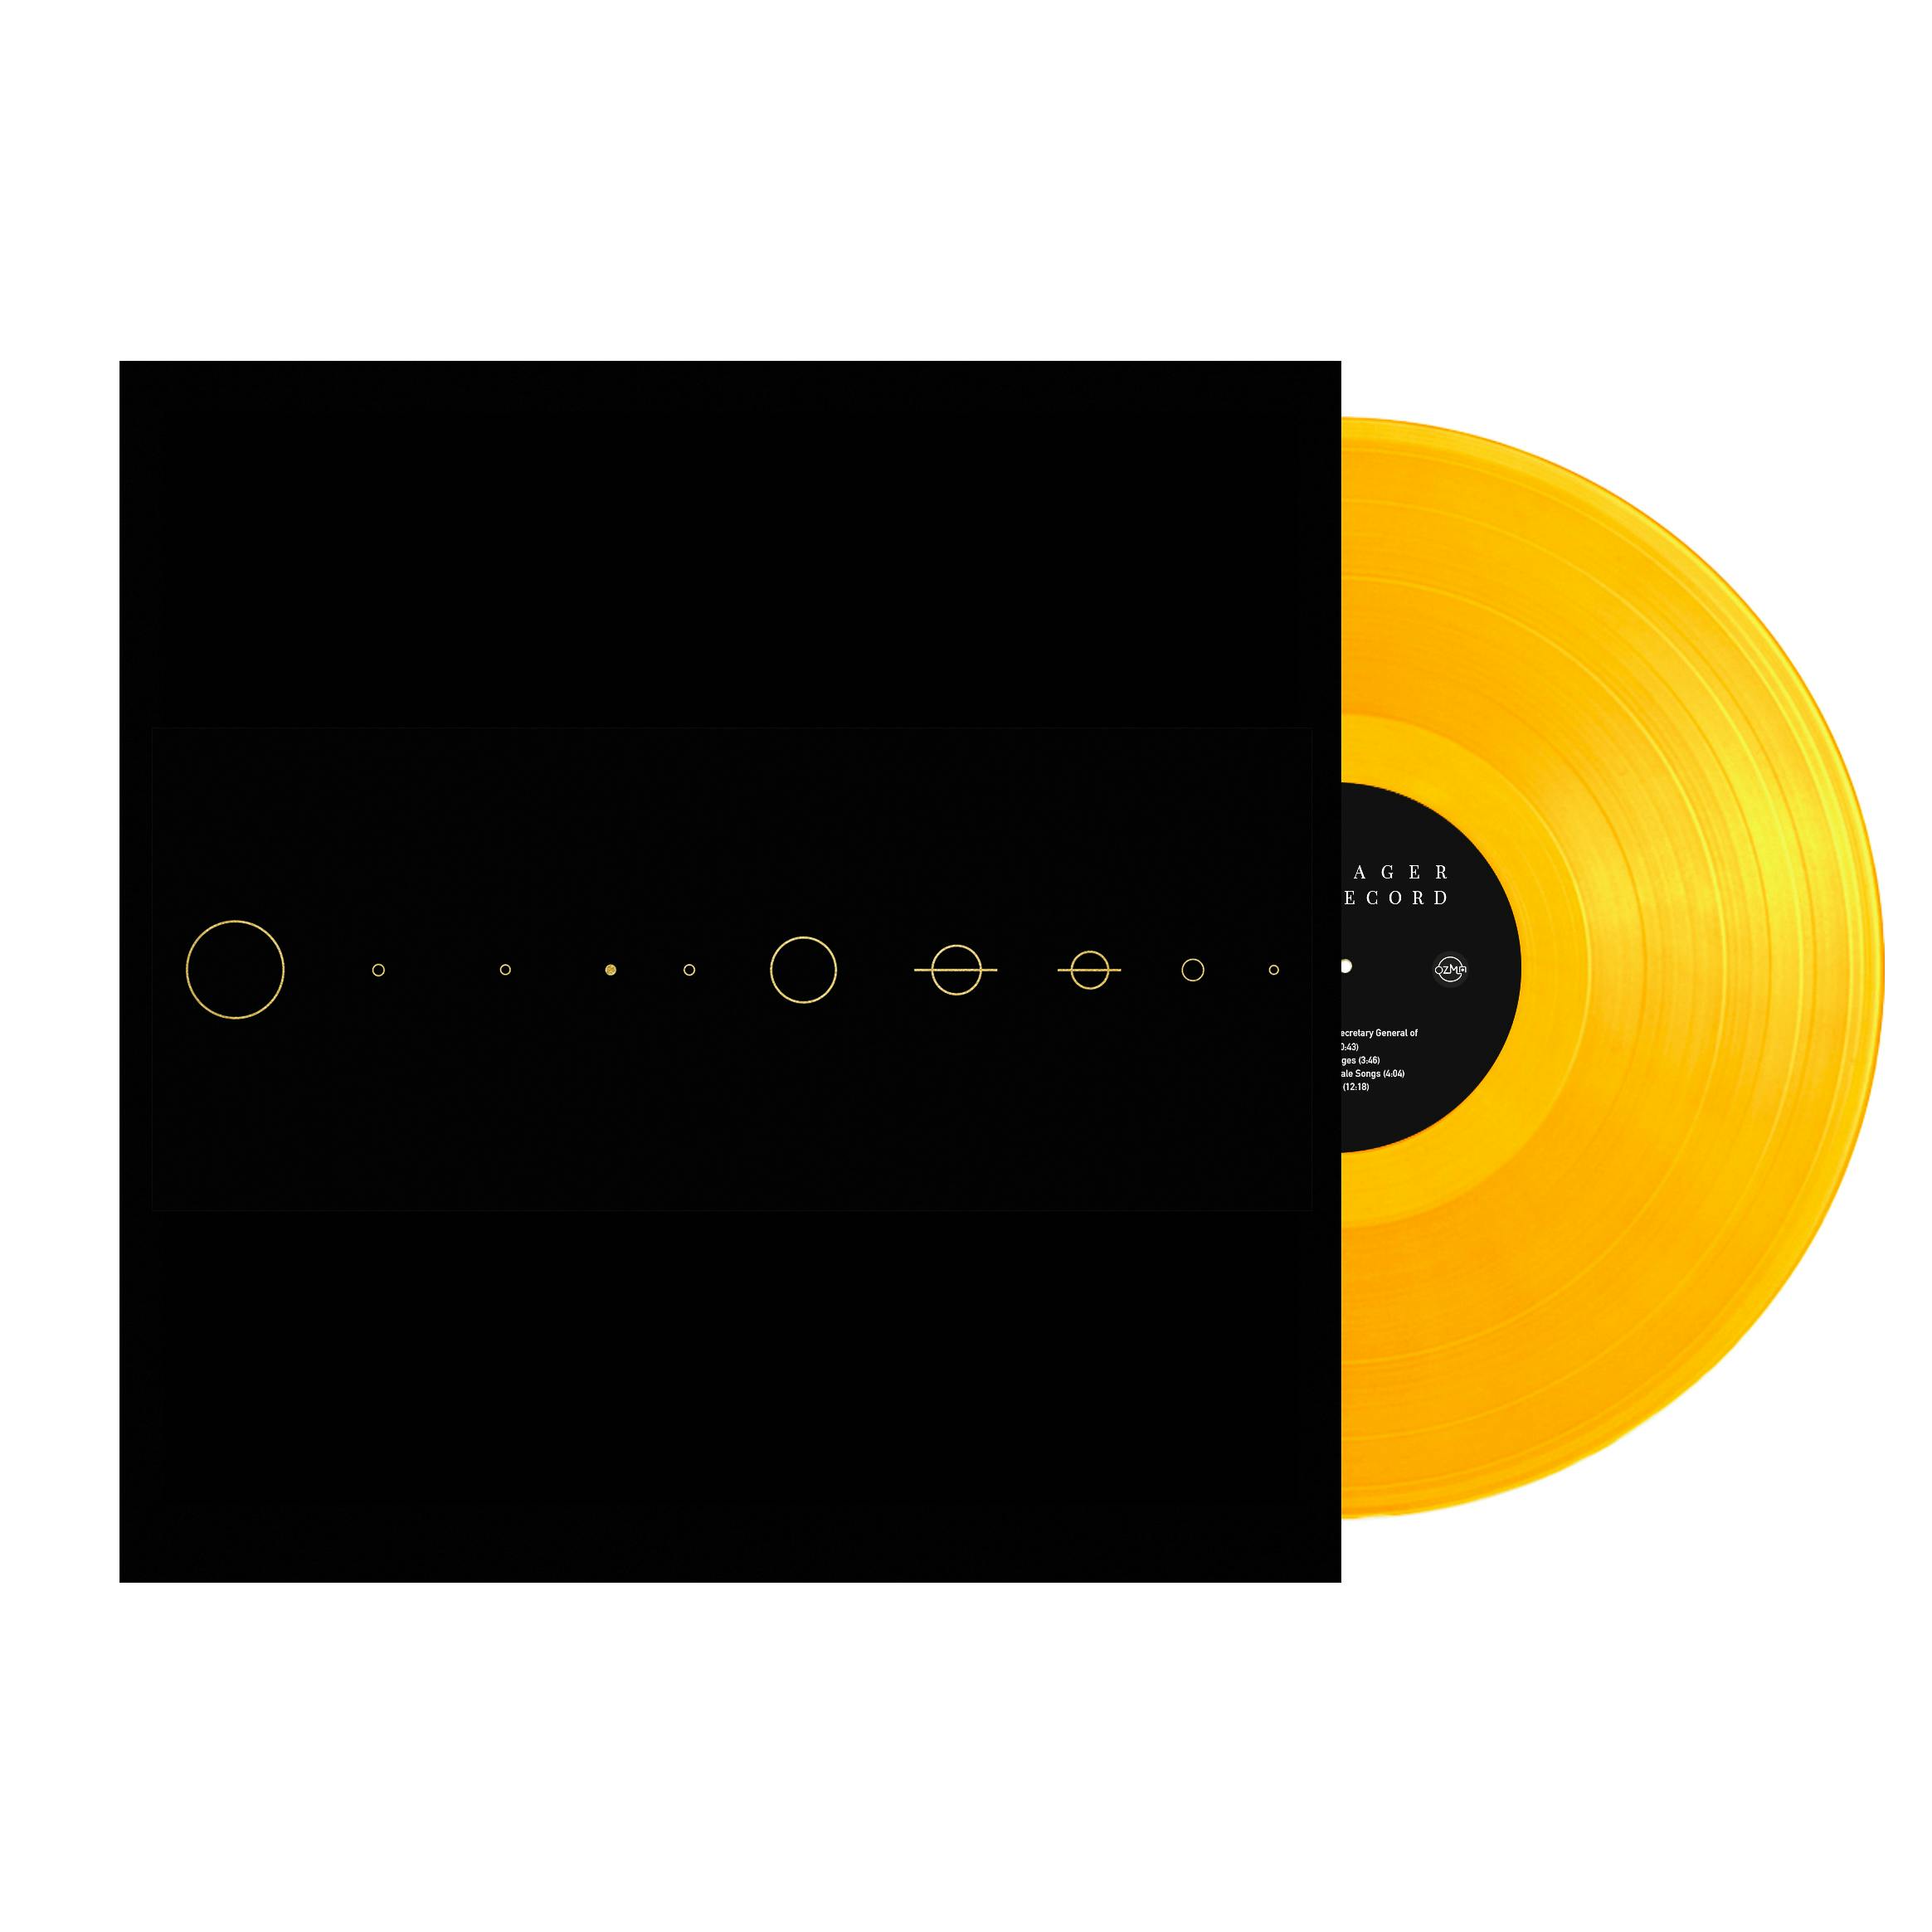 Ozma Records The Voyager Golden Record